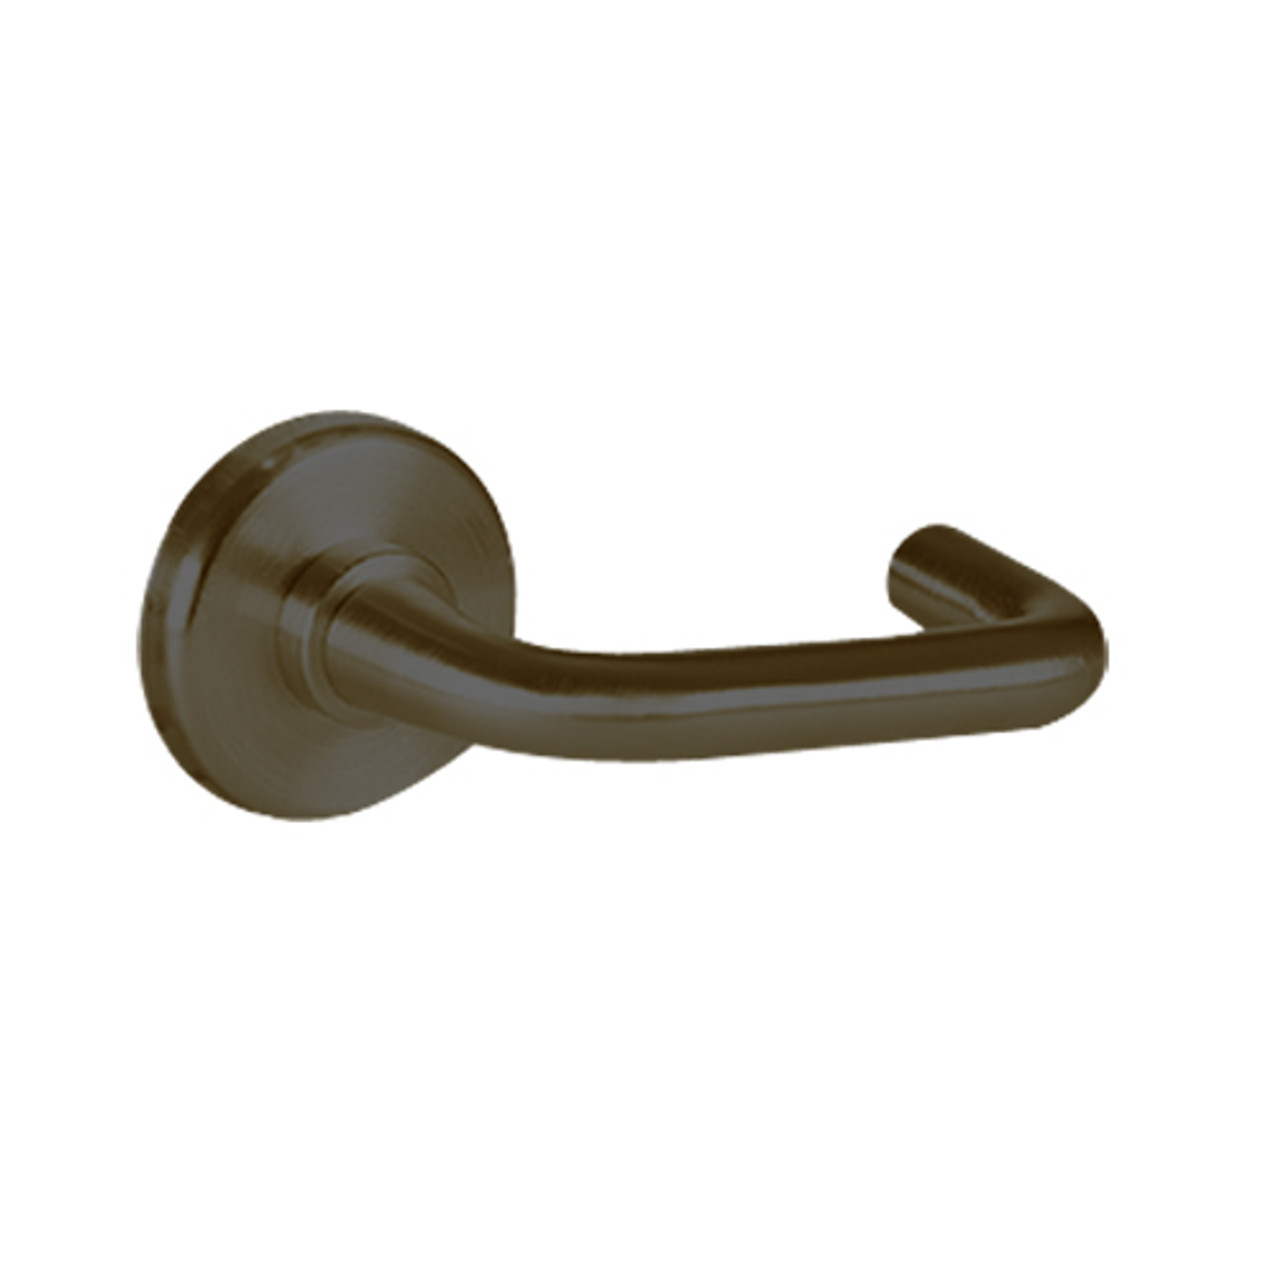 45H0N3R613 Best 40H Series Passage Heavy Duty Mortise Lever Lock with Solid Tube Return Style in Oil Rubbed Bronze